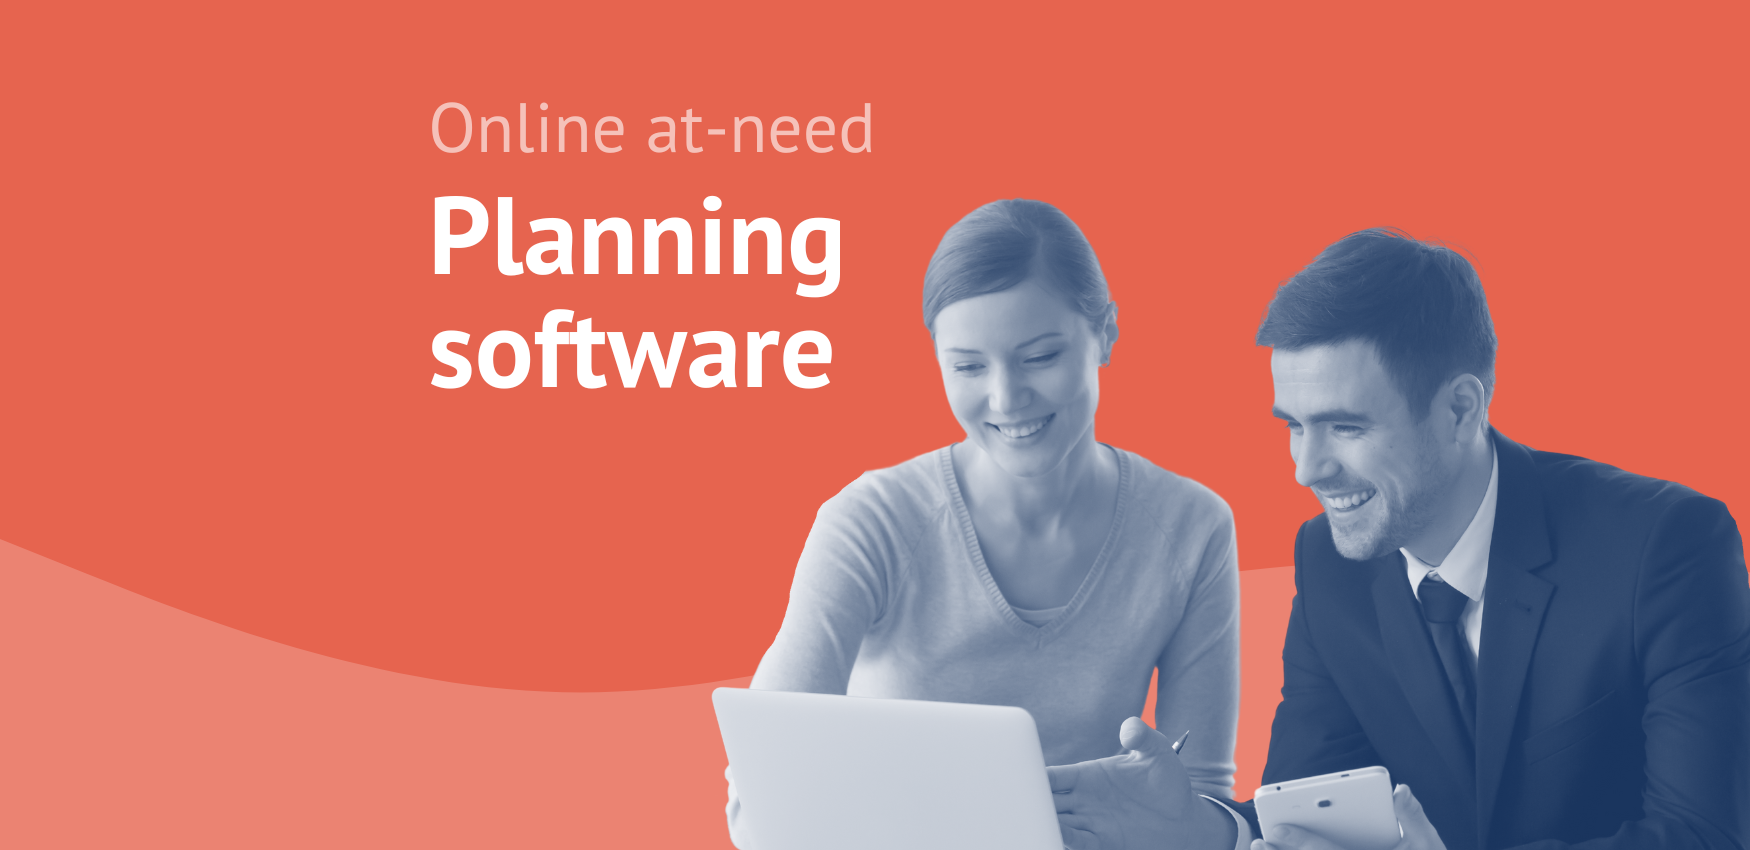 Why Your Funeral Home Needs Online At-Need Planning Software